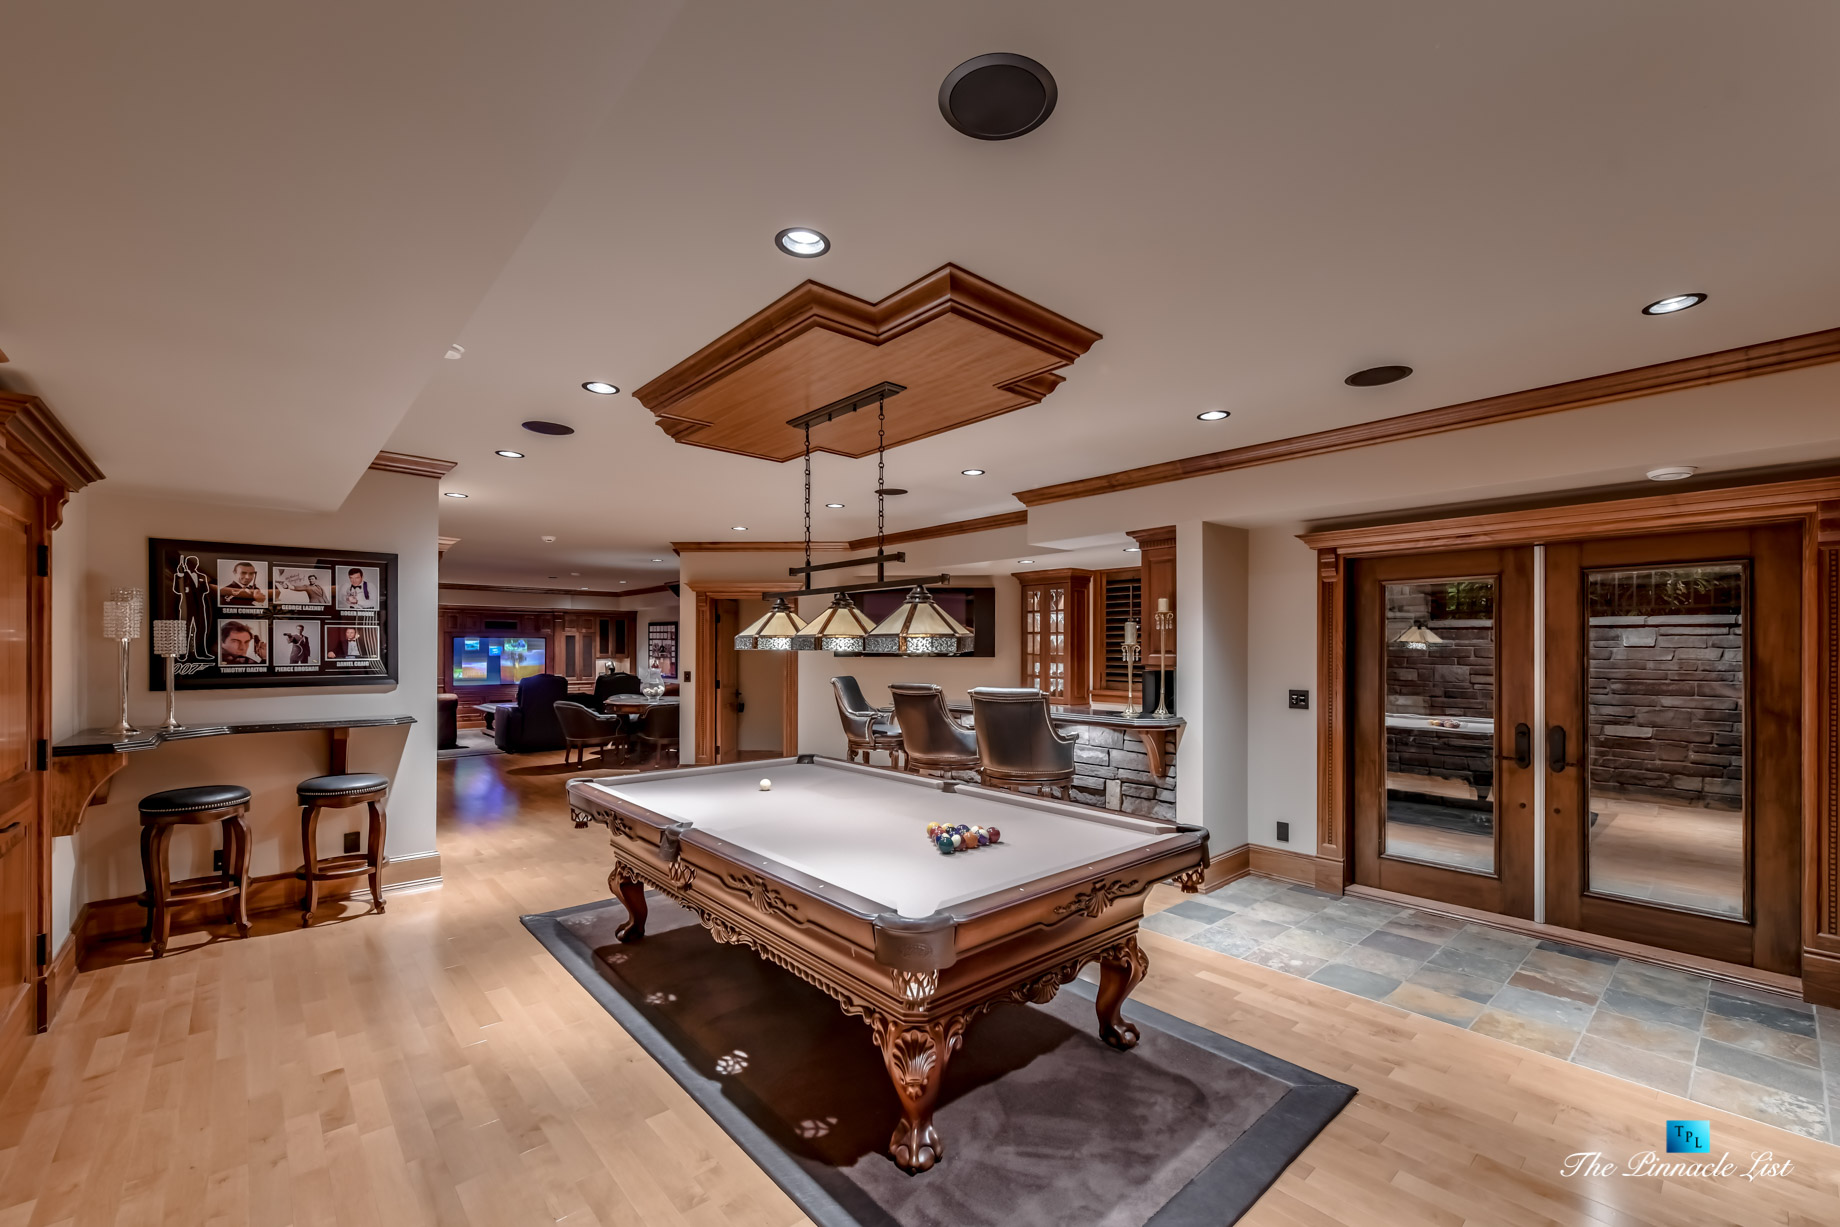 3053 Anmore Creek Way, Anmore, BC, Canada – Basement Man Cave Pool Table and Bar – Luxury Real Estate – Greater Vancouver Home